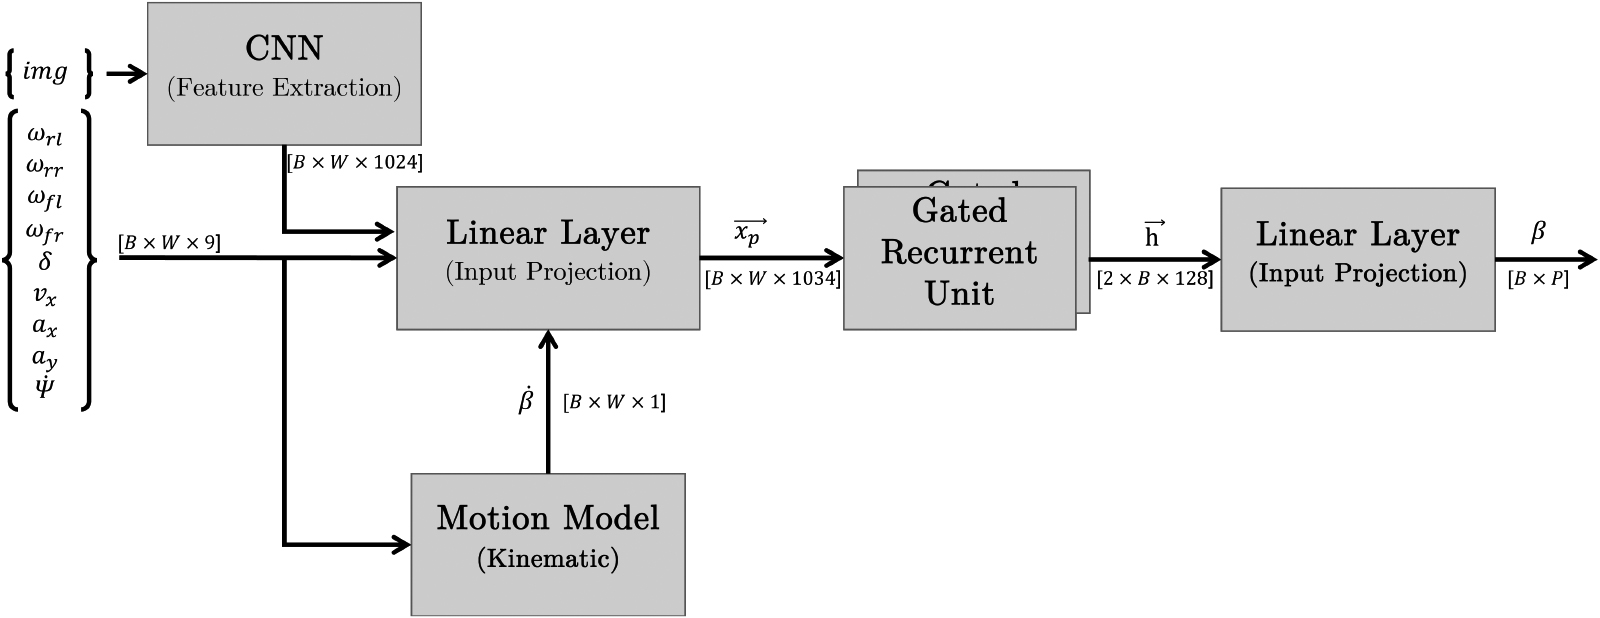 The proposed method with a batch size of B, sliding window length of W and a output prediction horizon of P considering only one camera. The proposed approach utilizes various sensor data, including images (img), wheel angular velocities (ωx⁢y), steering angle (δ), longitudinal velocity (vx), longitudinal and lateral acceleration (ax and ay), yaw rate (ψ˙), as well as the derivative of the prediction target (β˙) computed using the kinematic single-track model, as input for time series prediction. The model integrates a CNN [17] for image-based feature extraction and a GRU with two recurrent layers, a hidden dimensionality of 128, and a tanh activation function for capturing temporal dependencies and ensuring effective information transfer across time steps. This amalgamation results in a hybrid kinematic CNN-GRU informed model that leverages exteroceptive data. The dimensionality of the various inputs, as well as the propagated values are displayed within square brackets.